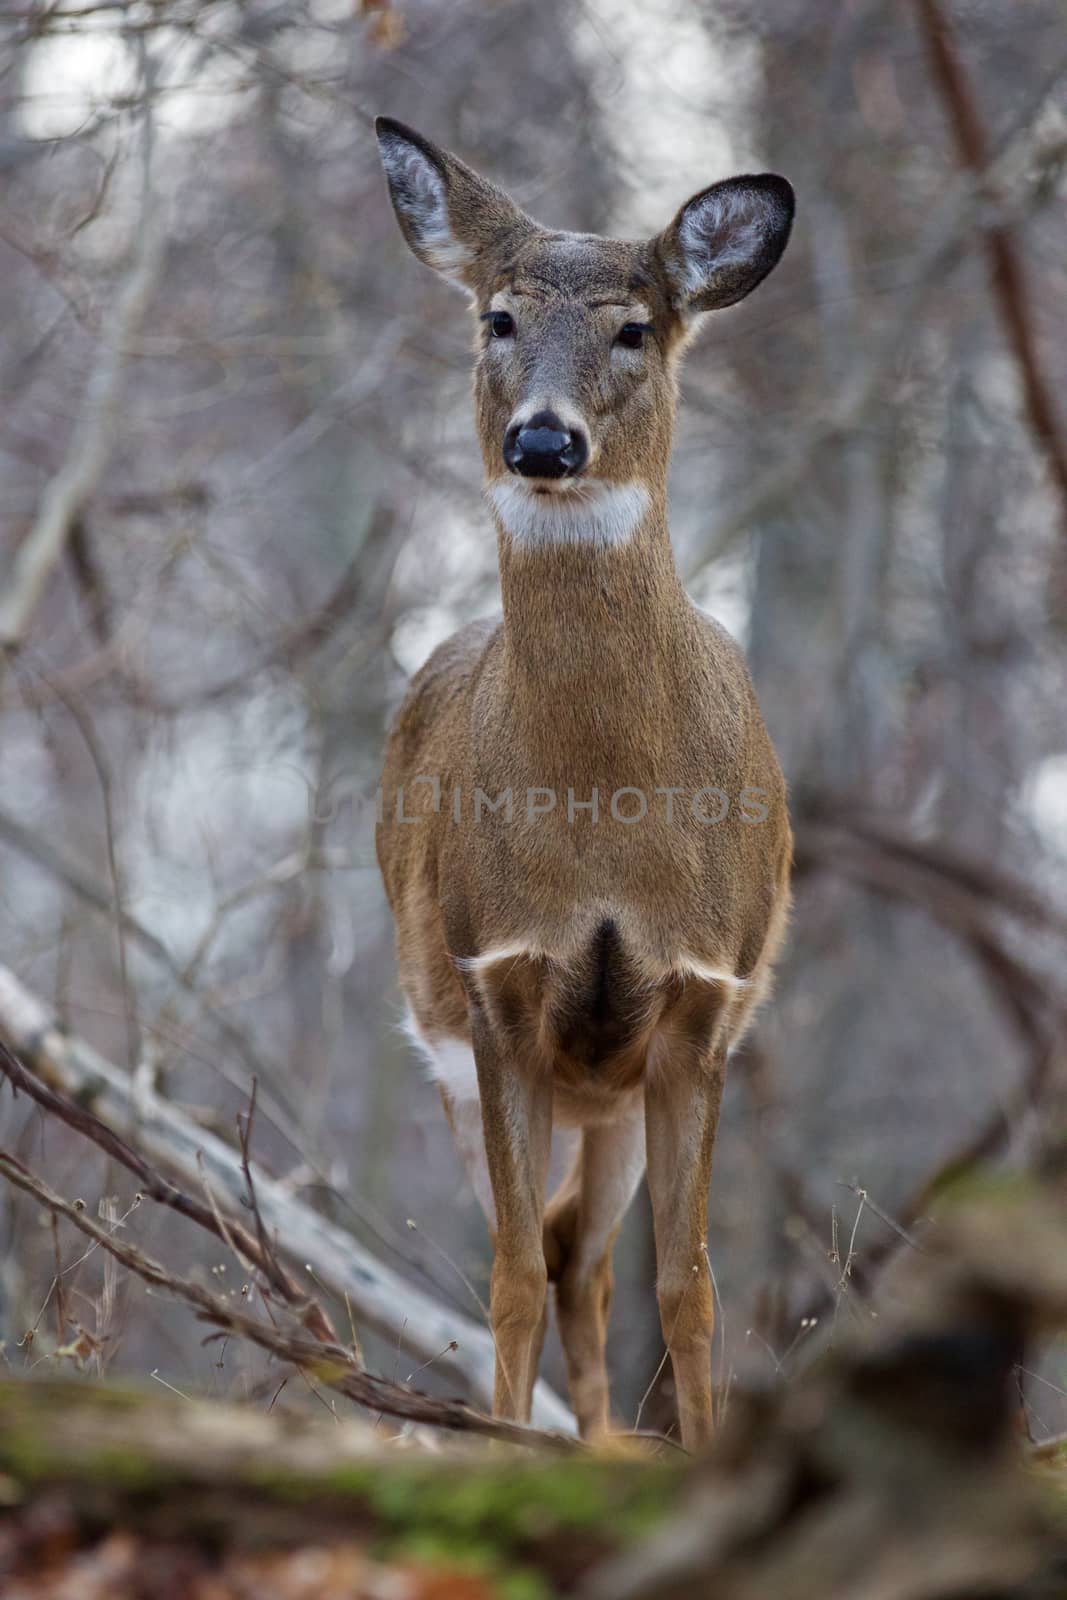 Beautiful image with the deer in the forest by teo